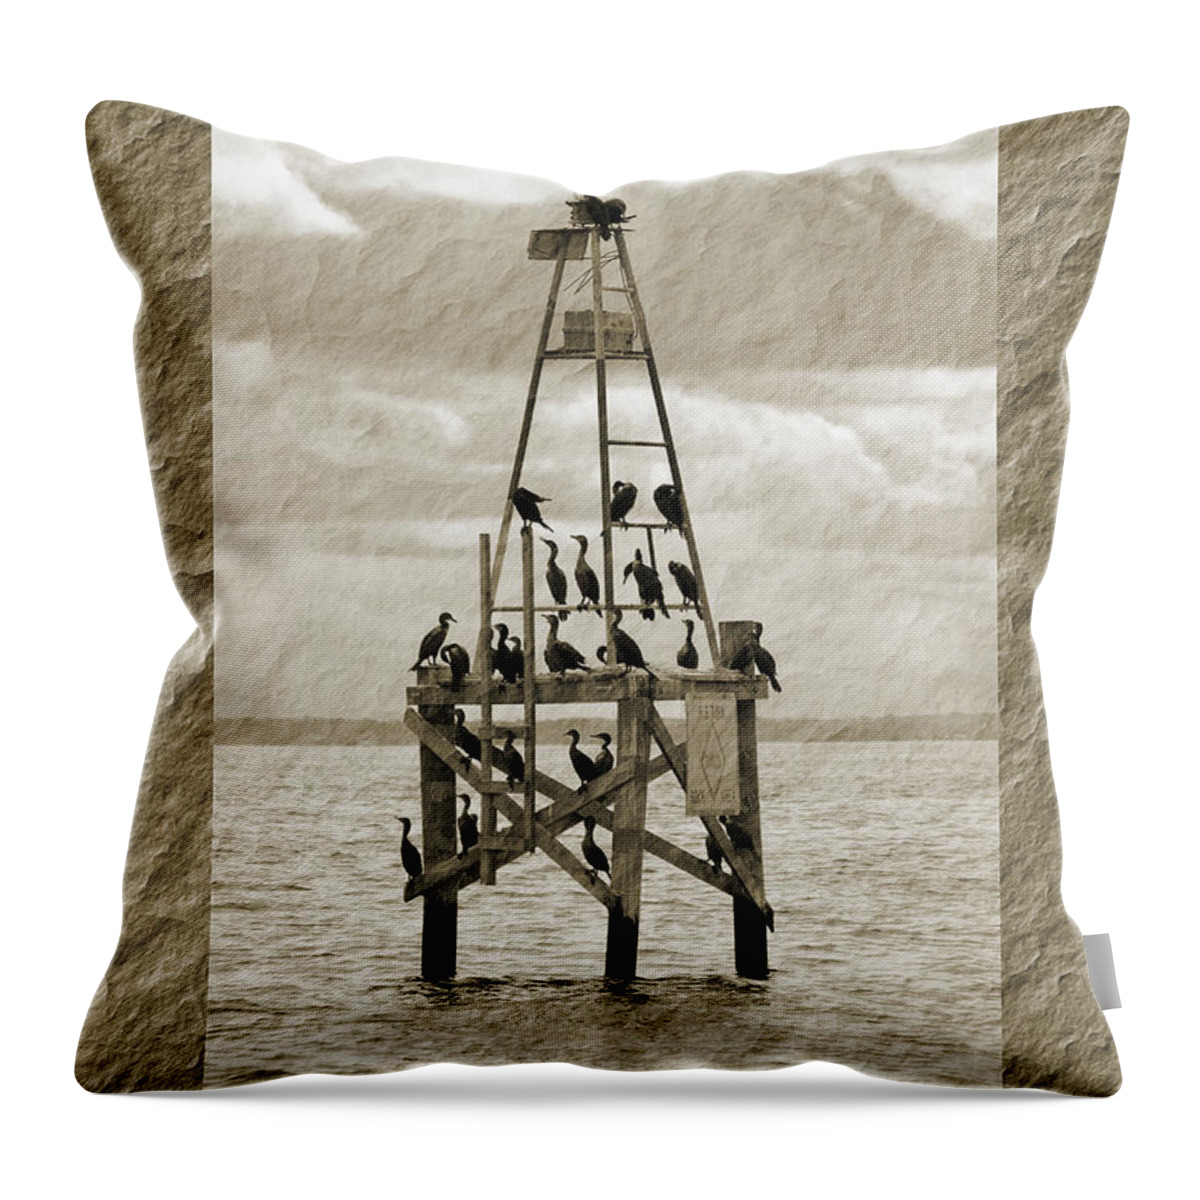 Birds Throw Pillow featuring the photograph Family Reunion by Donna Proctor